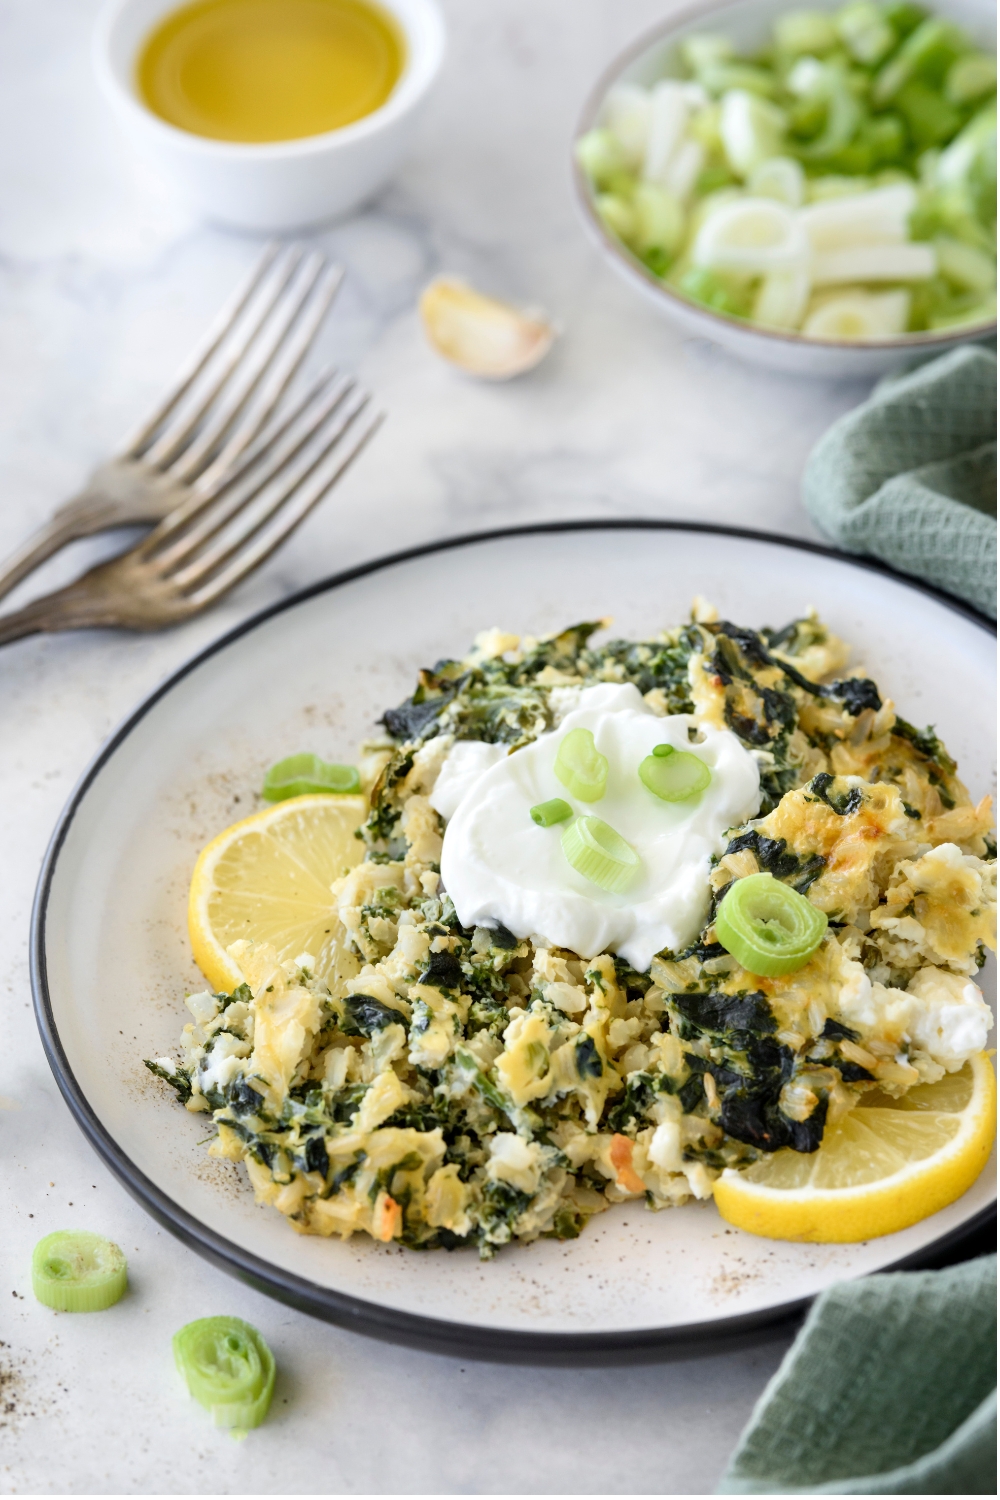 A plate with spinach rice casserole garnished with a dollop of yogurt, green onions, and a lemon wedge.